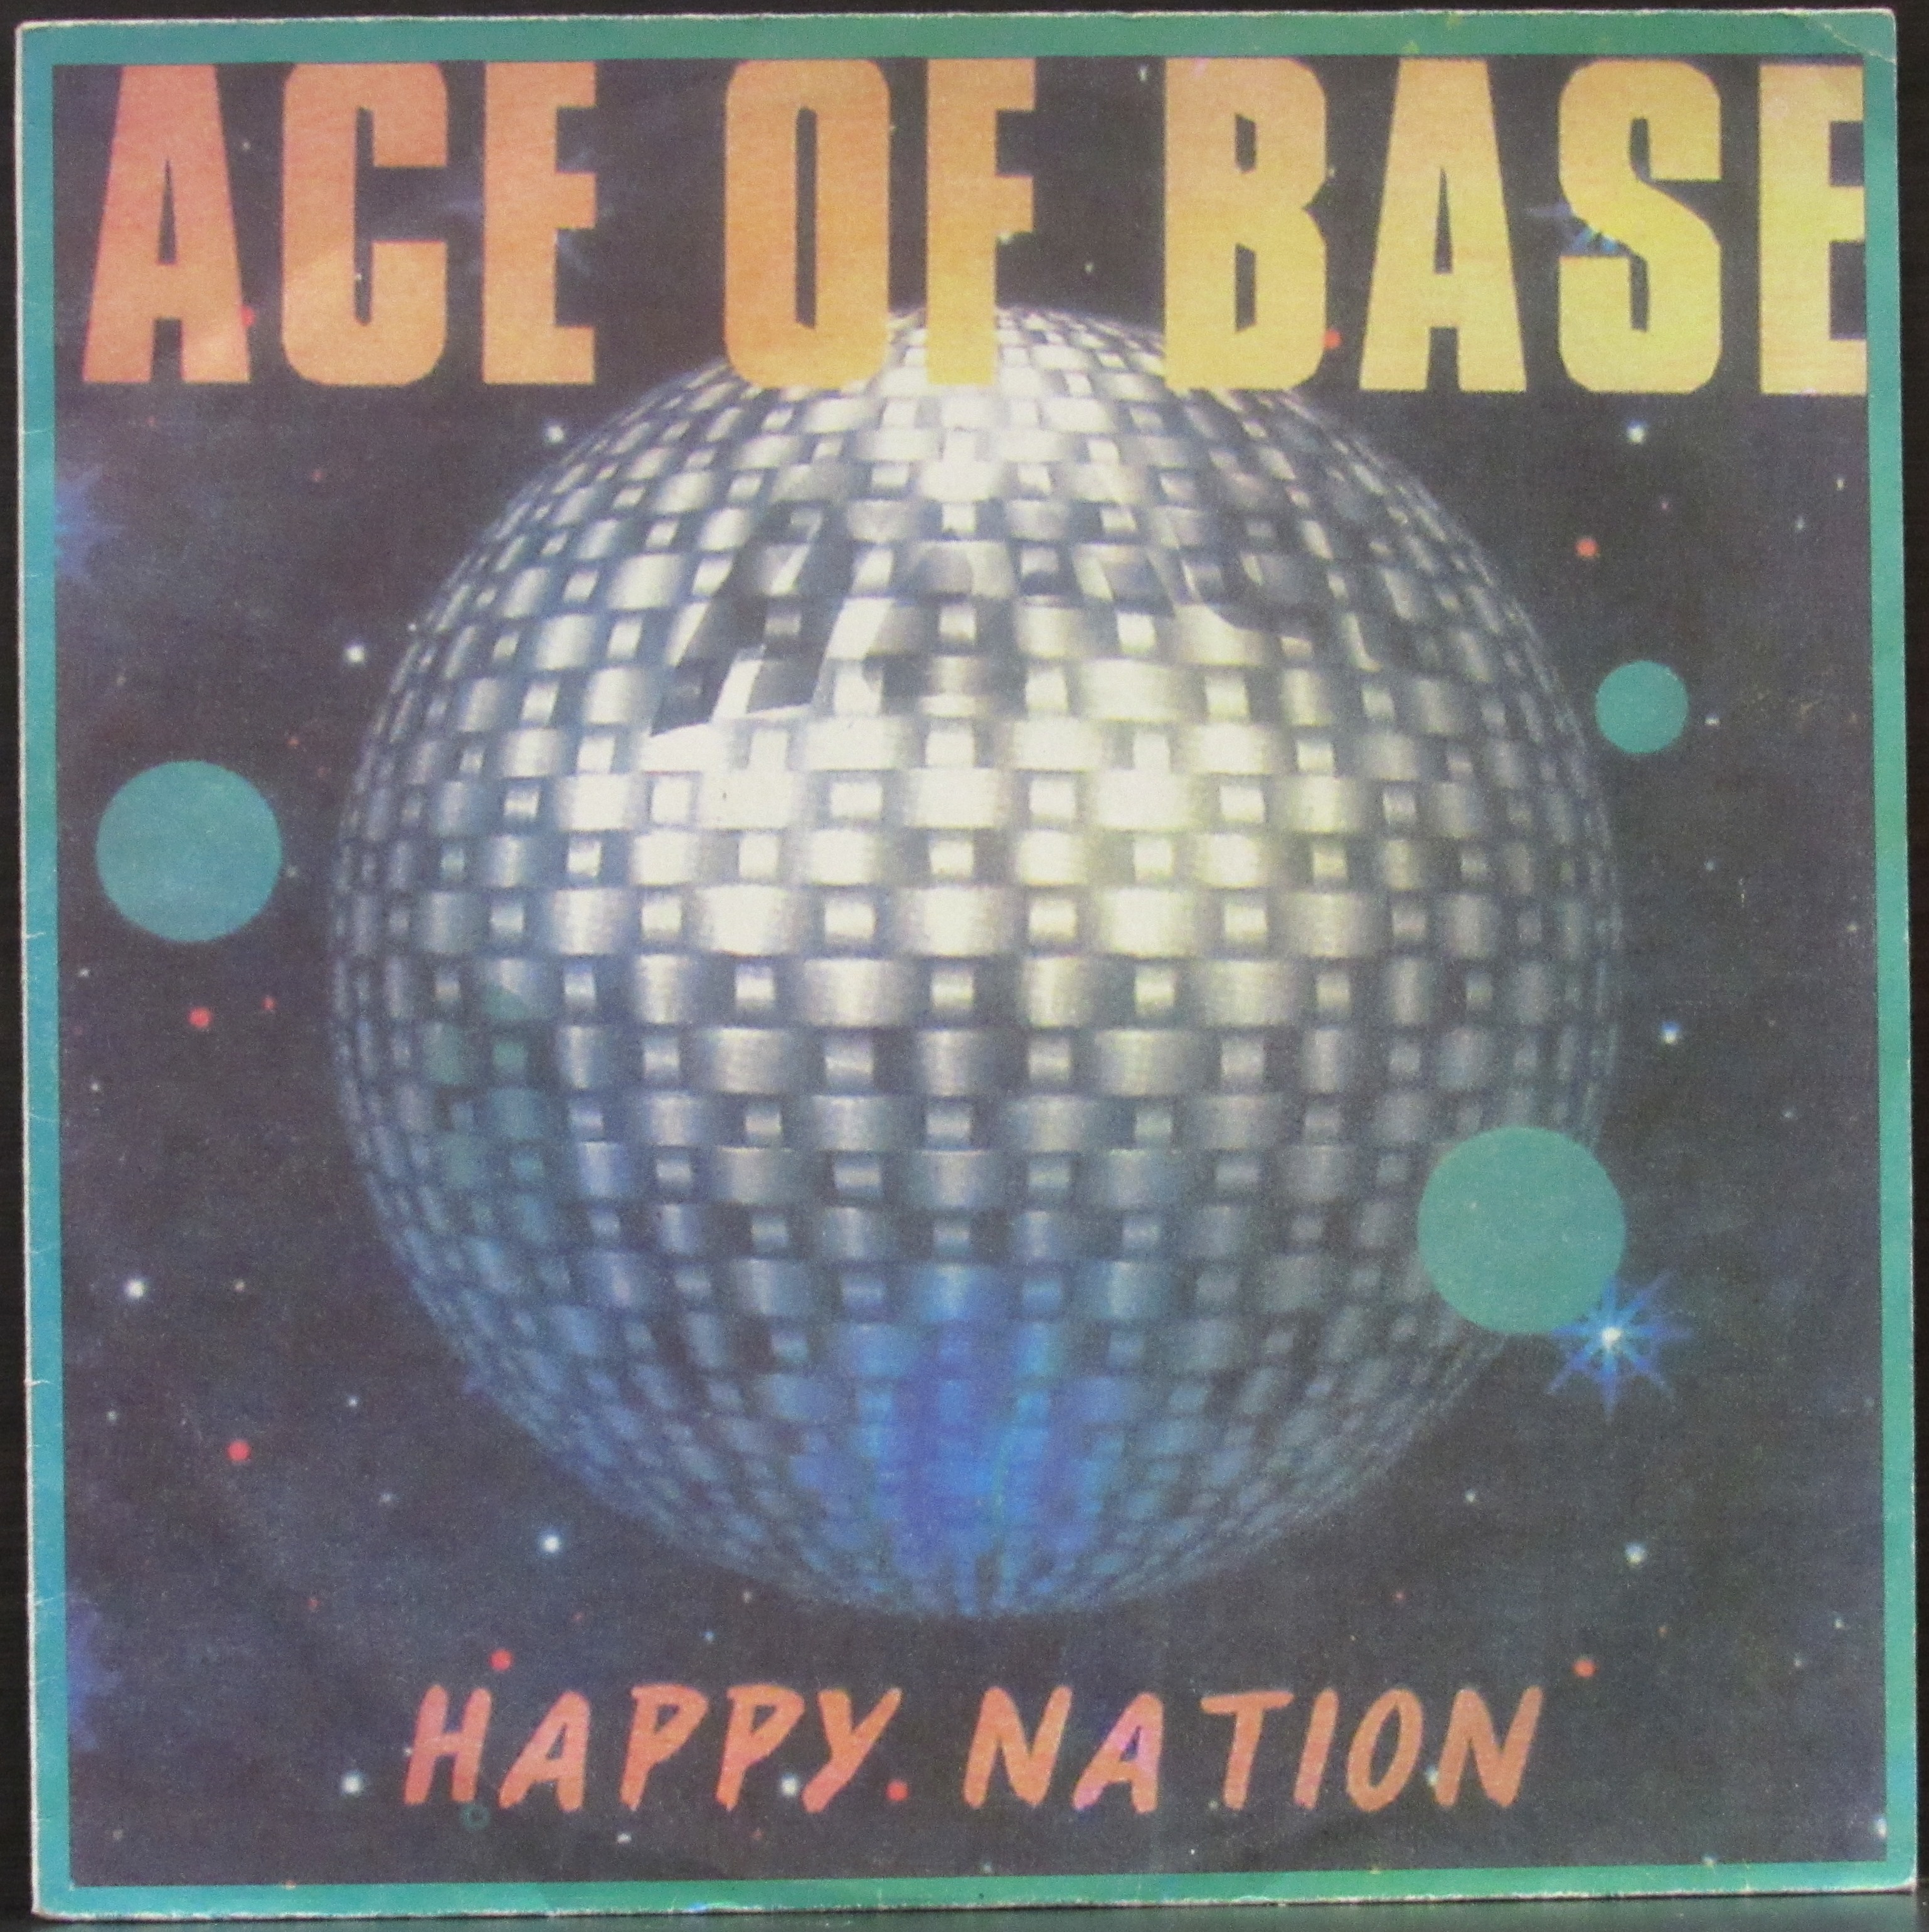 Fred mykos happy nation. Ace of Base 1993 Happy Nation. Happy Nation Ace of Base пластинка. Happy Nation виниловый диск. Ace of Base Happy Nation обложка.